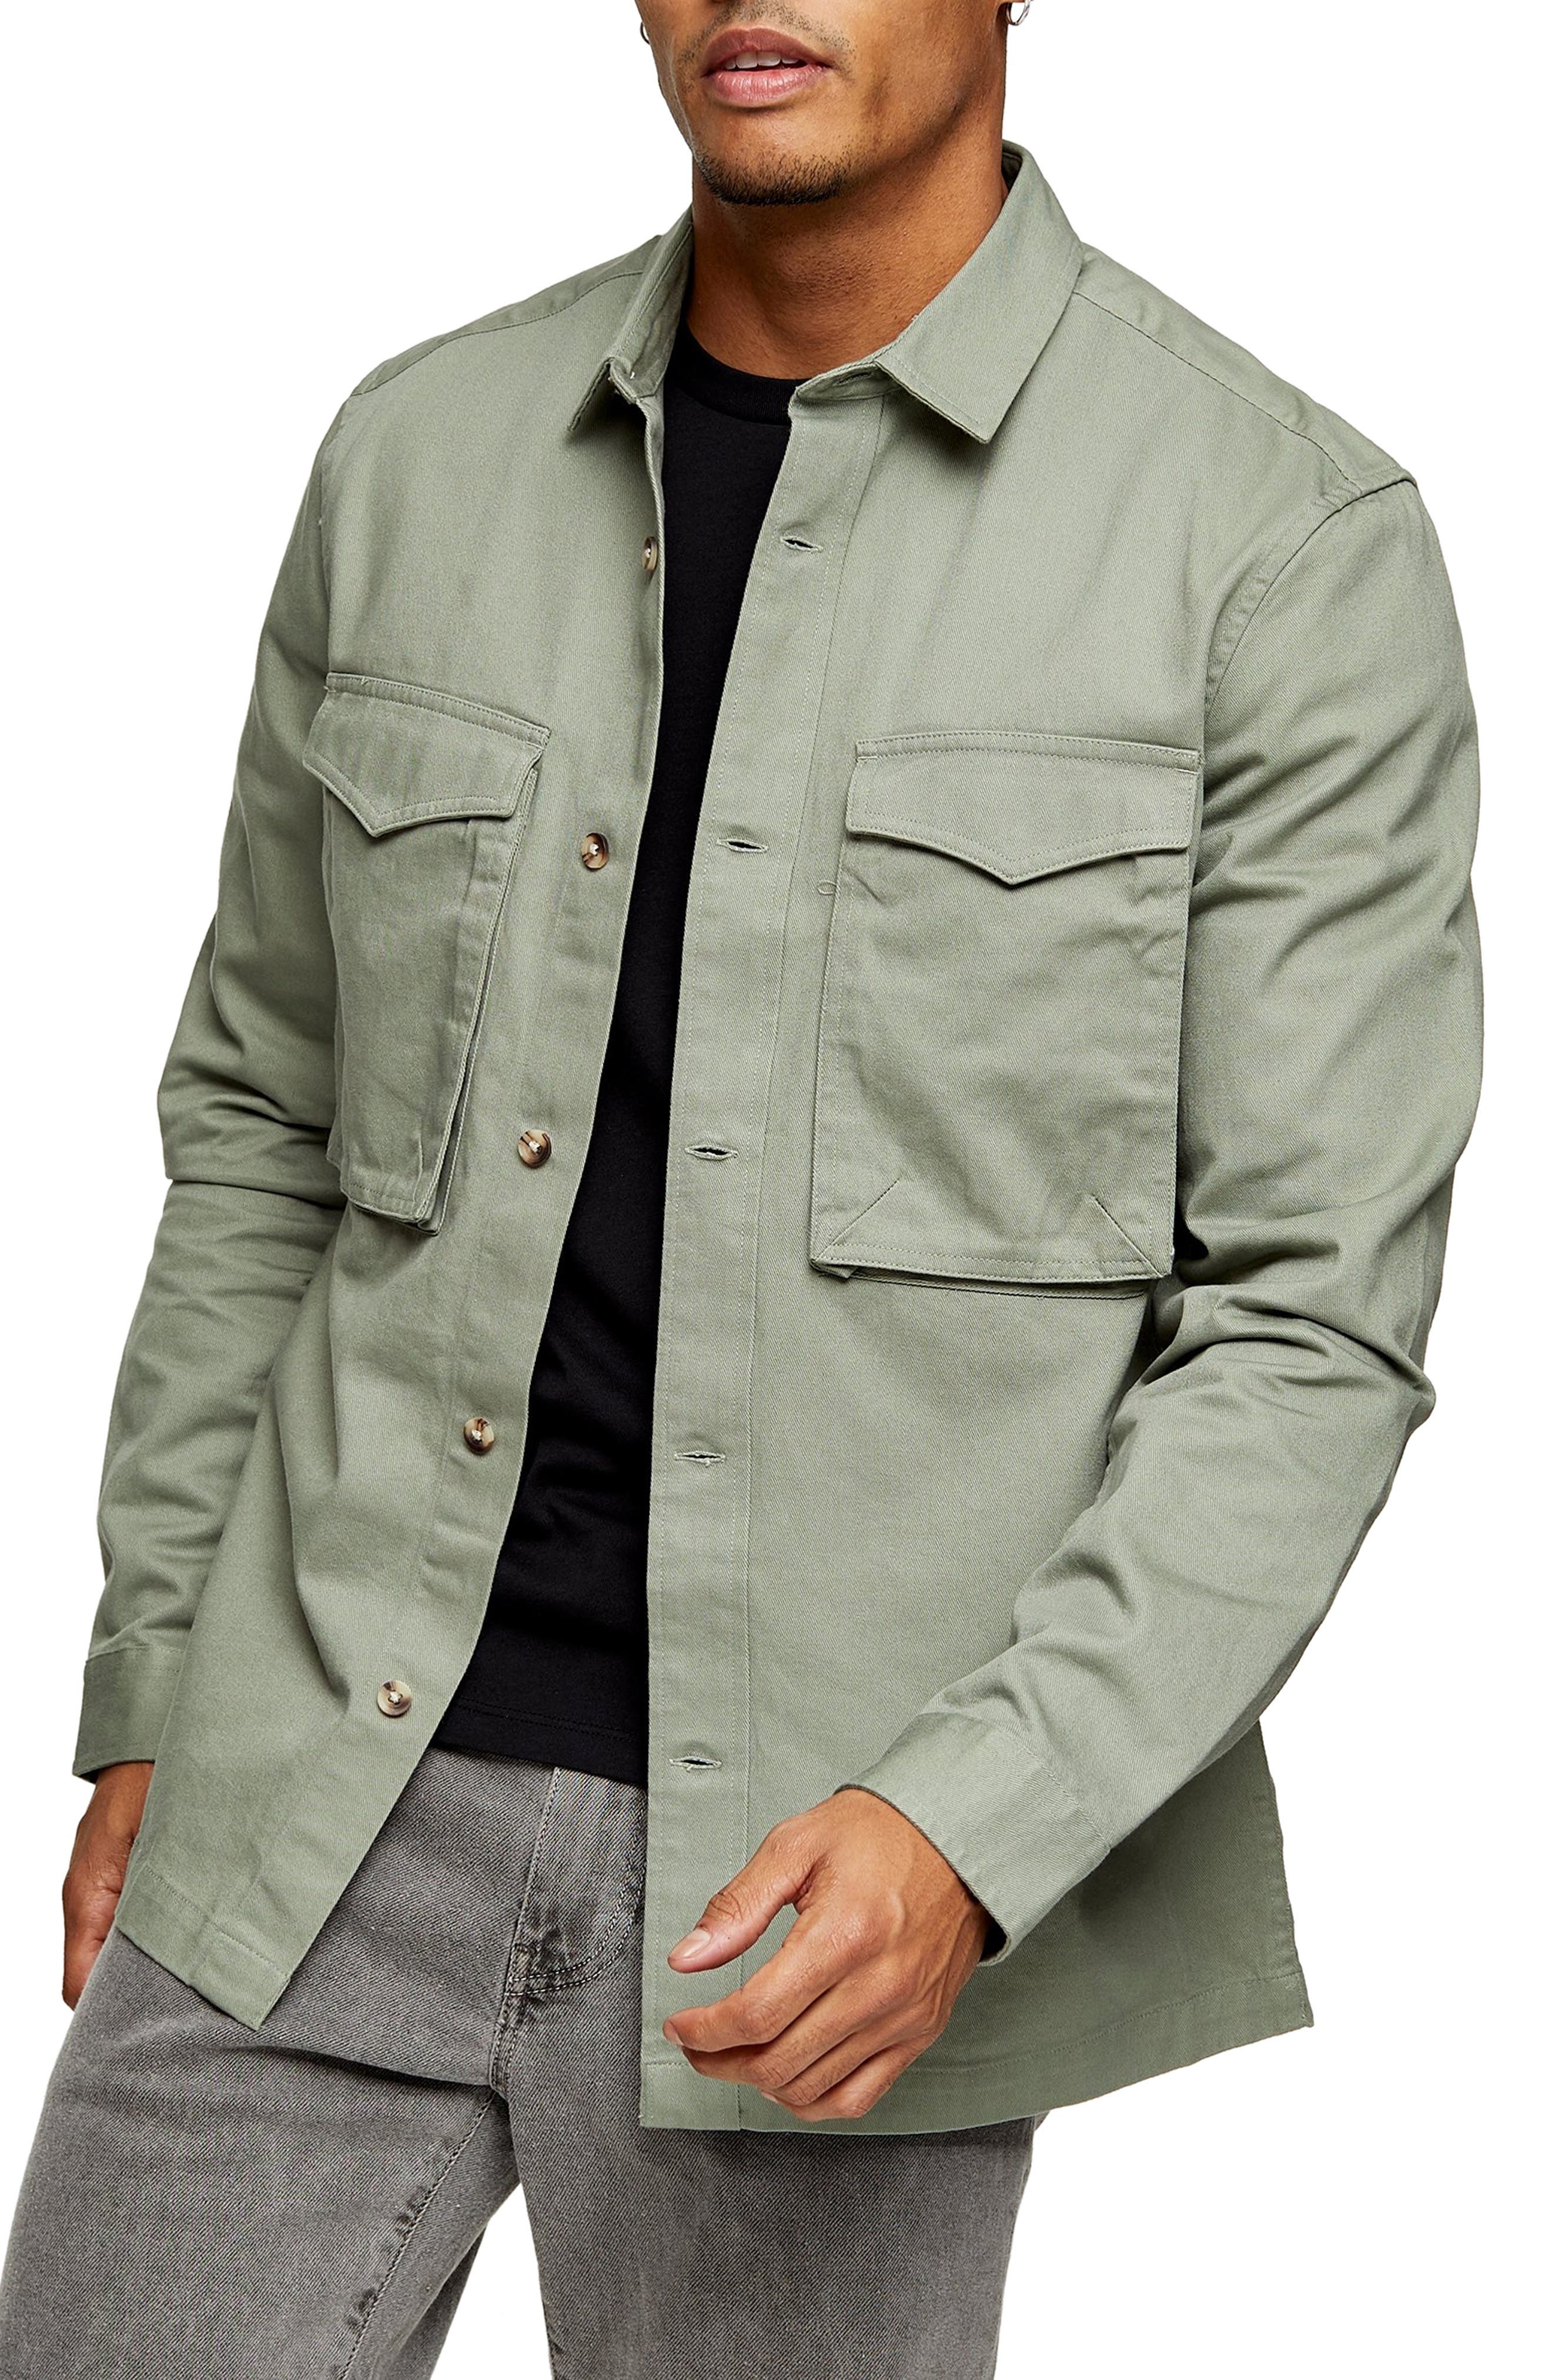 How to Wear Men's Overshirts? Style Tips to Rock the Shirt Jacket Trend -  Man2Man